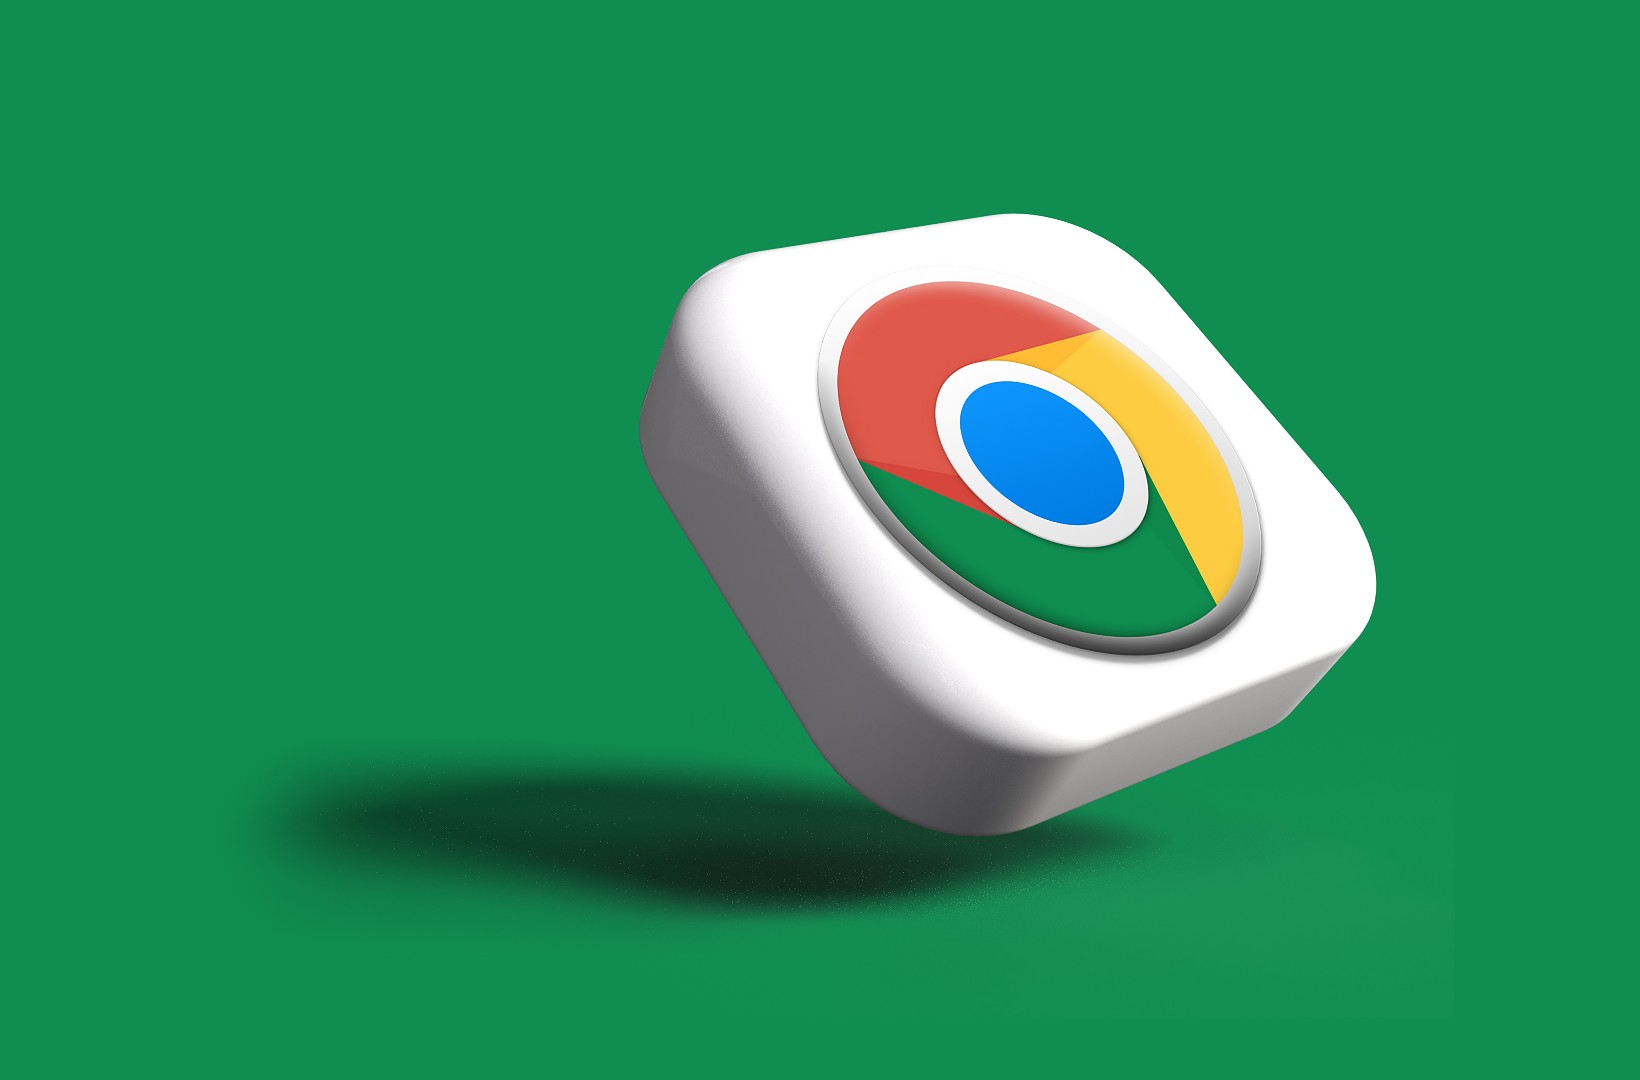 Google Chrome extension is available